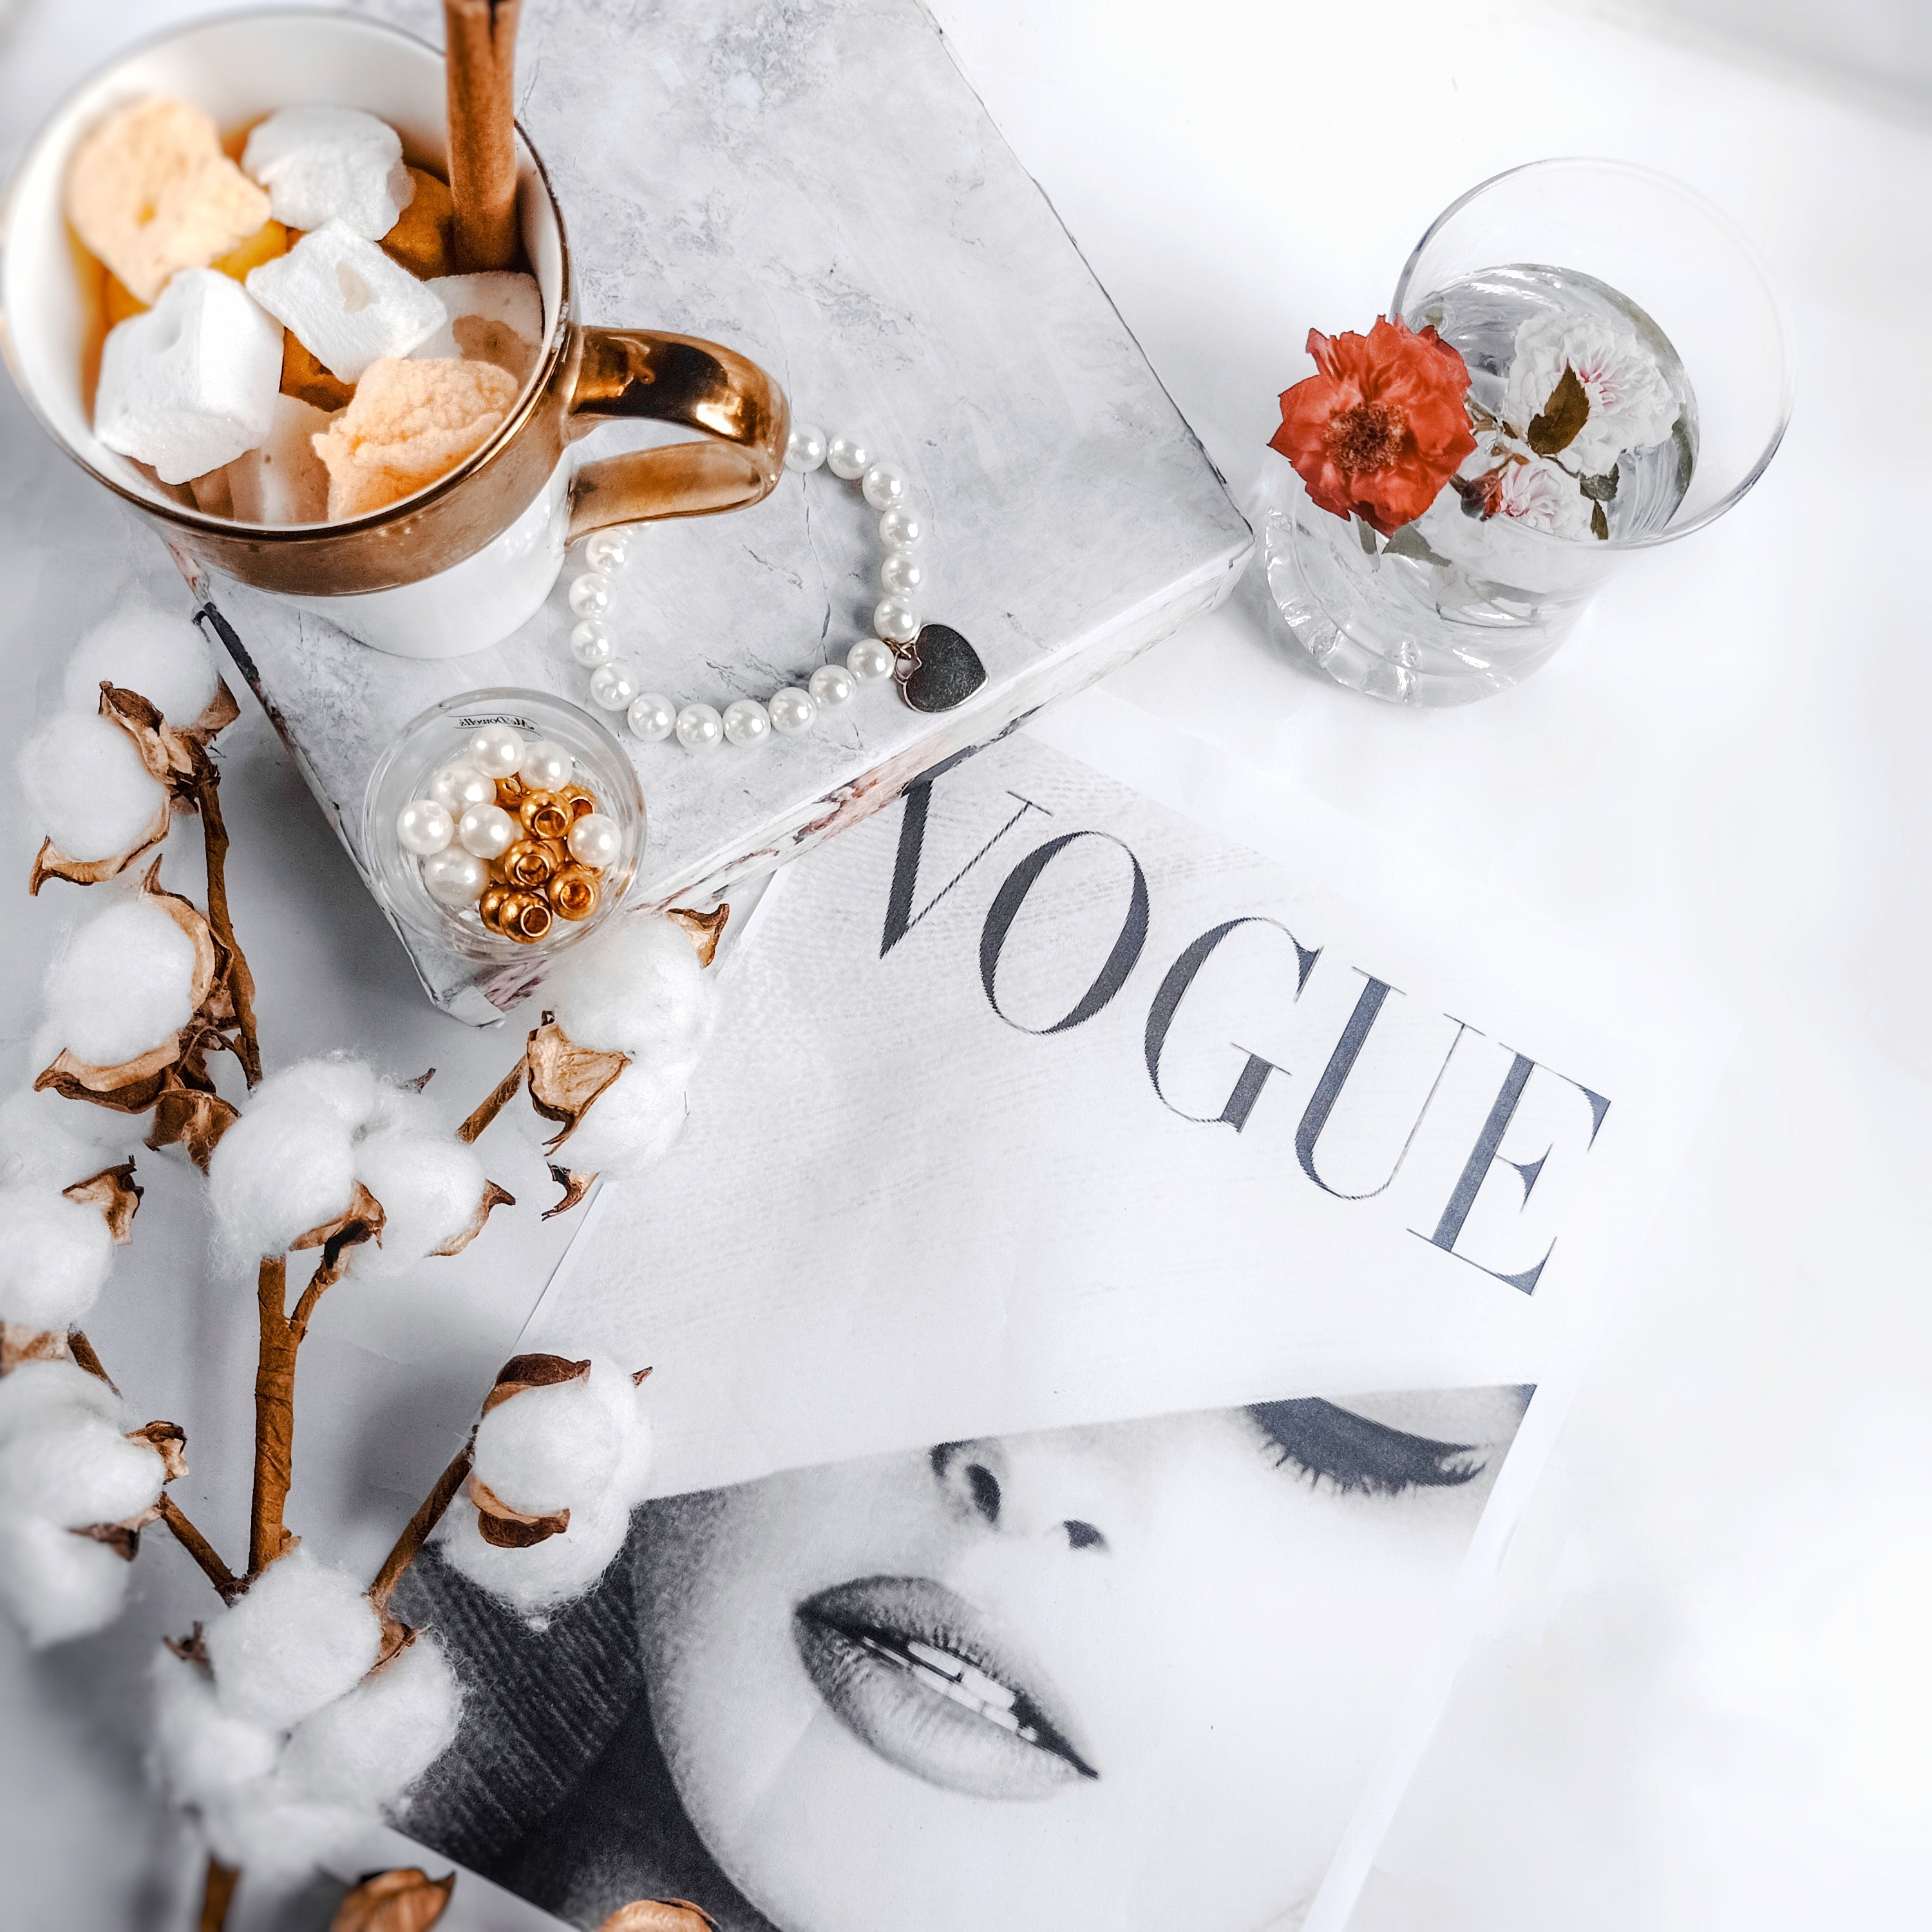 Vogue magazine on table with jewelry and cotton plant